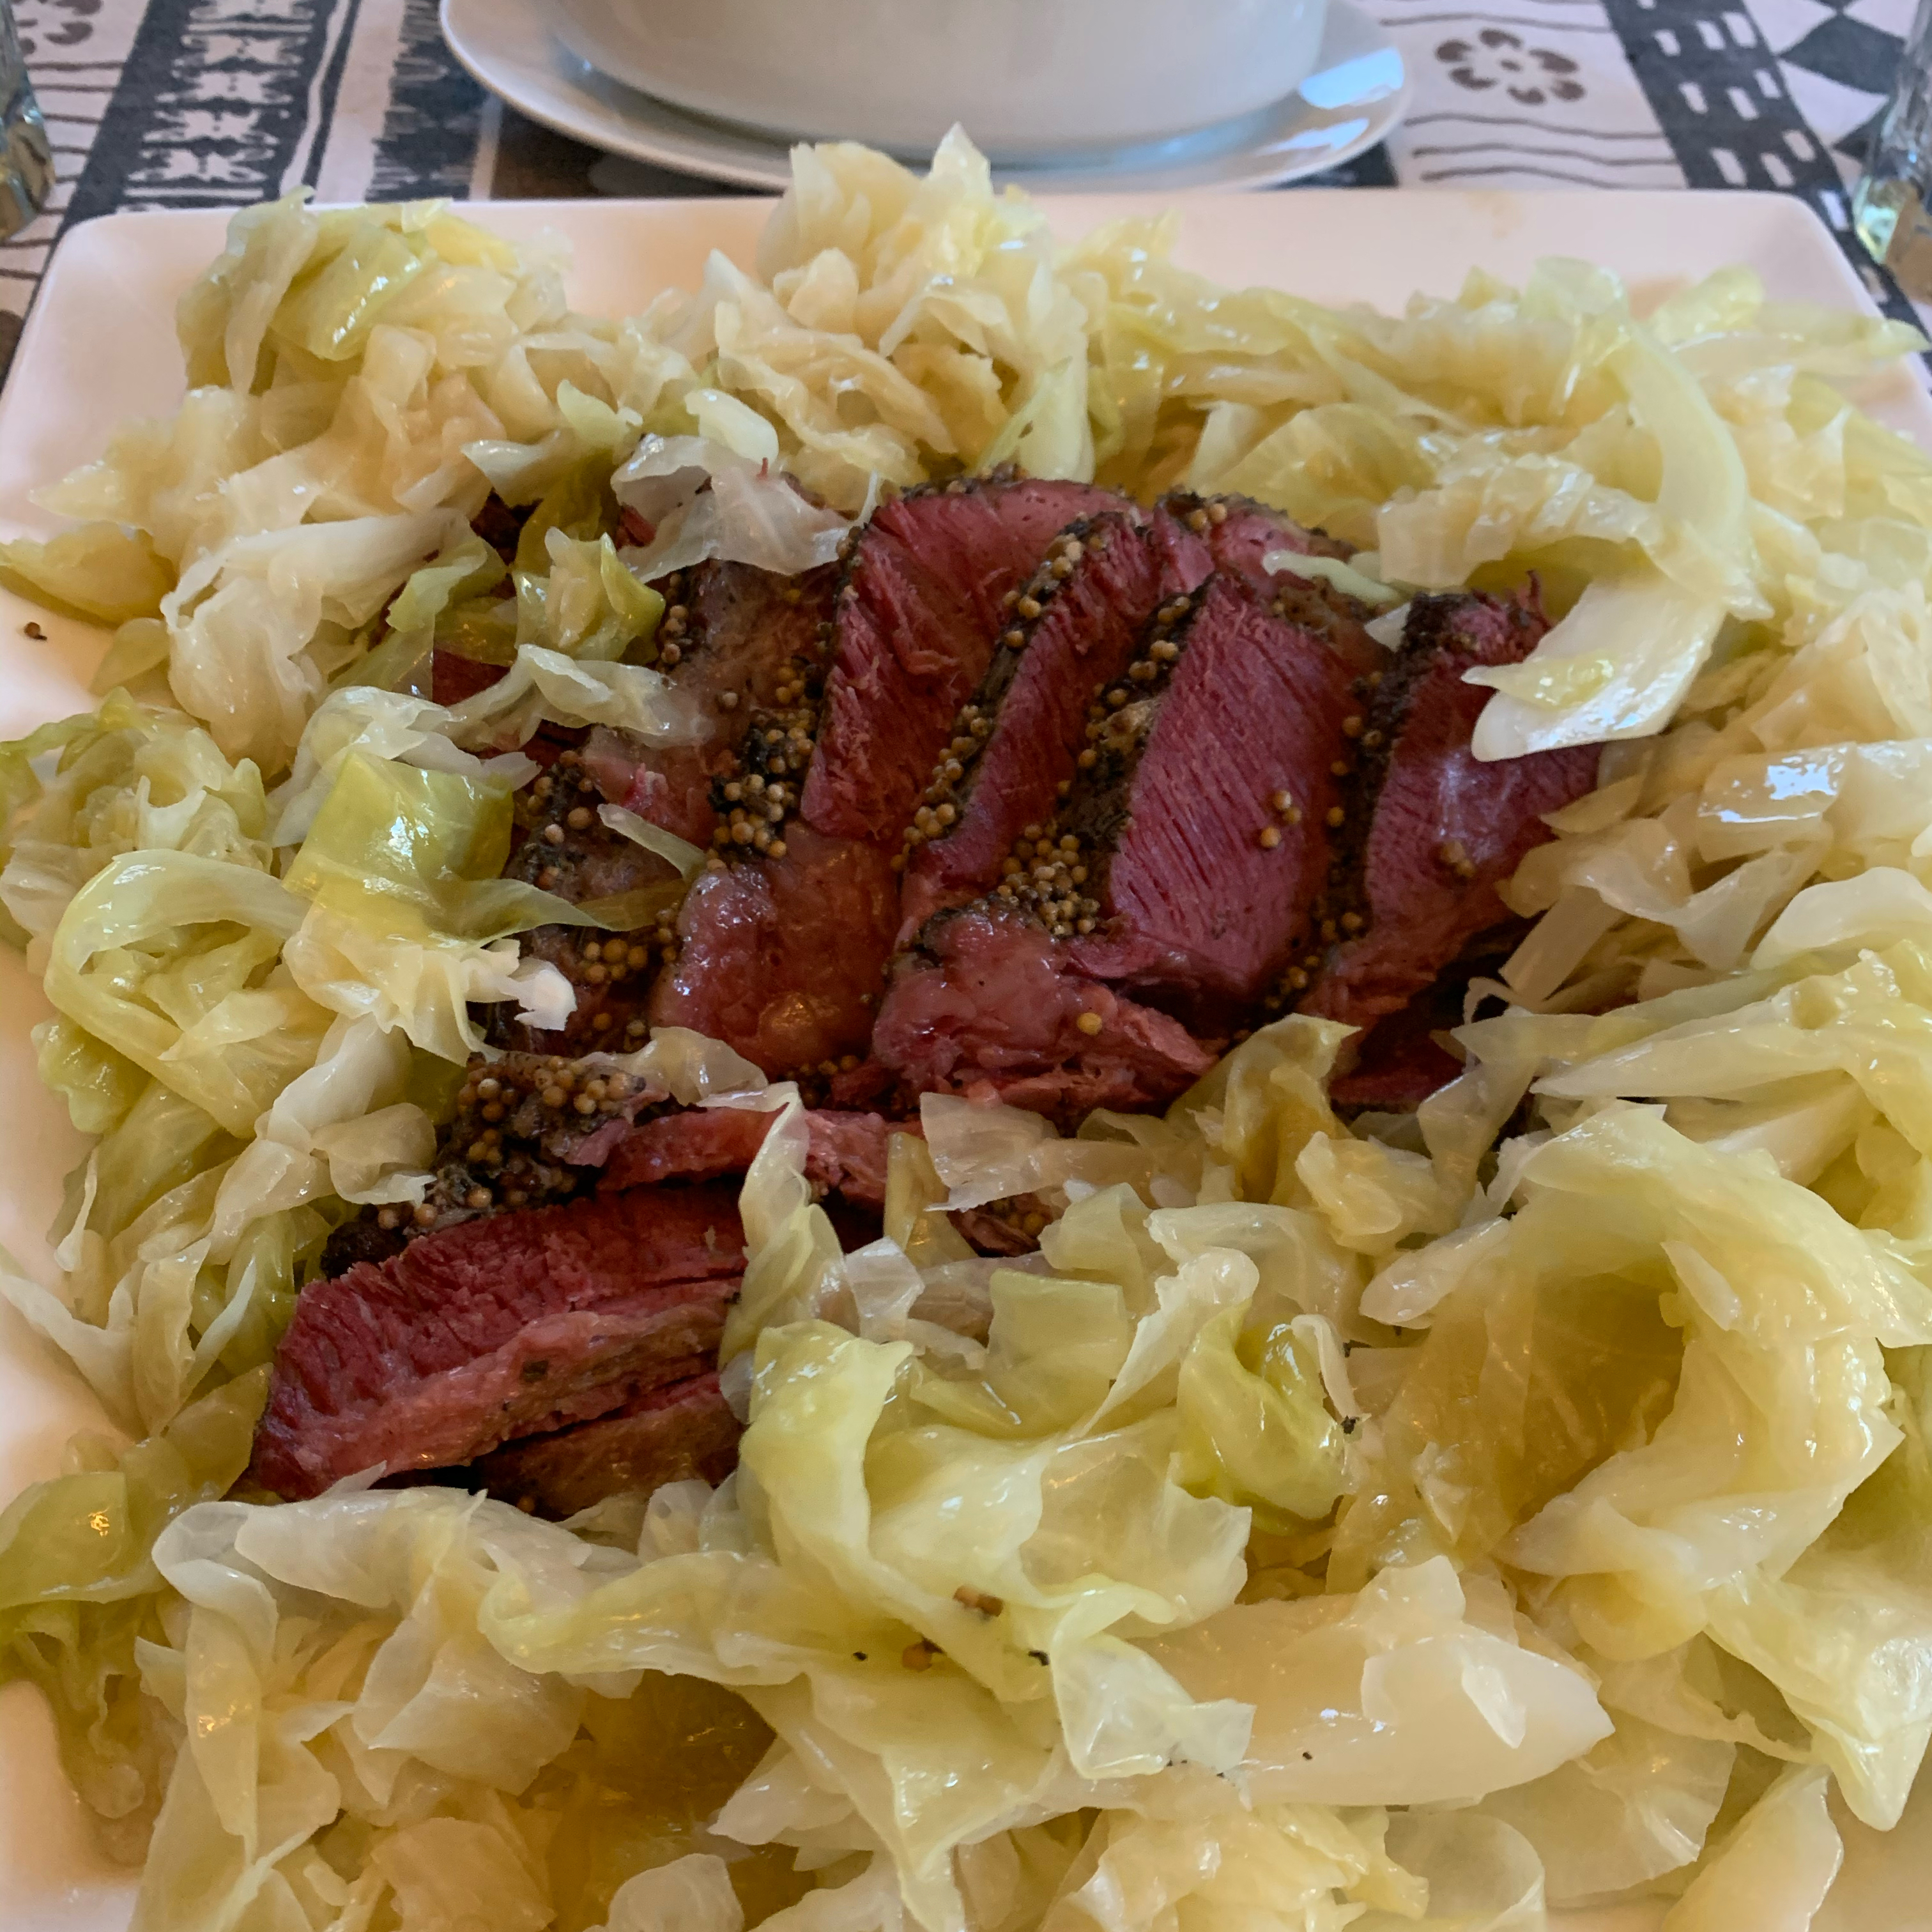 Corned Beef and Cabbage II